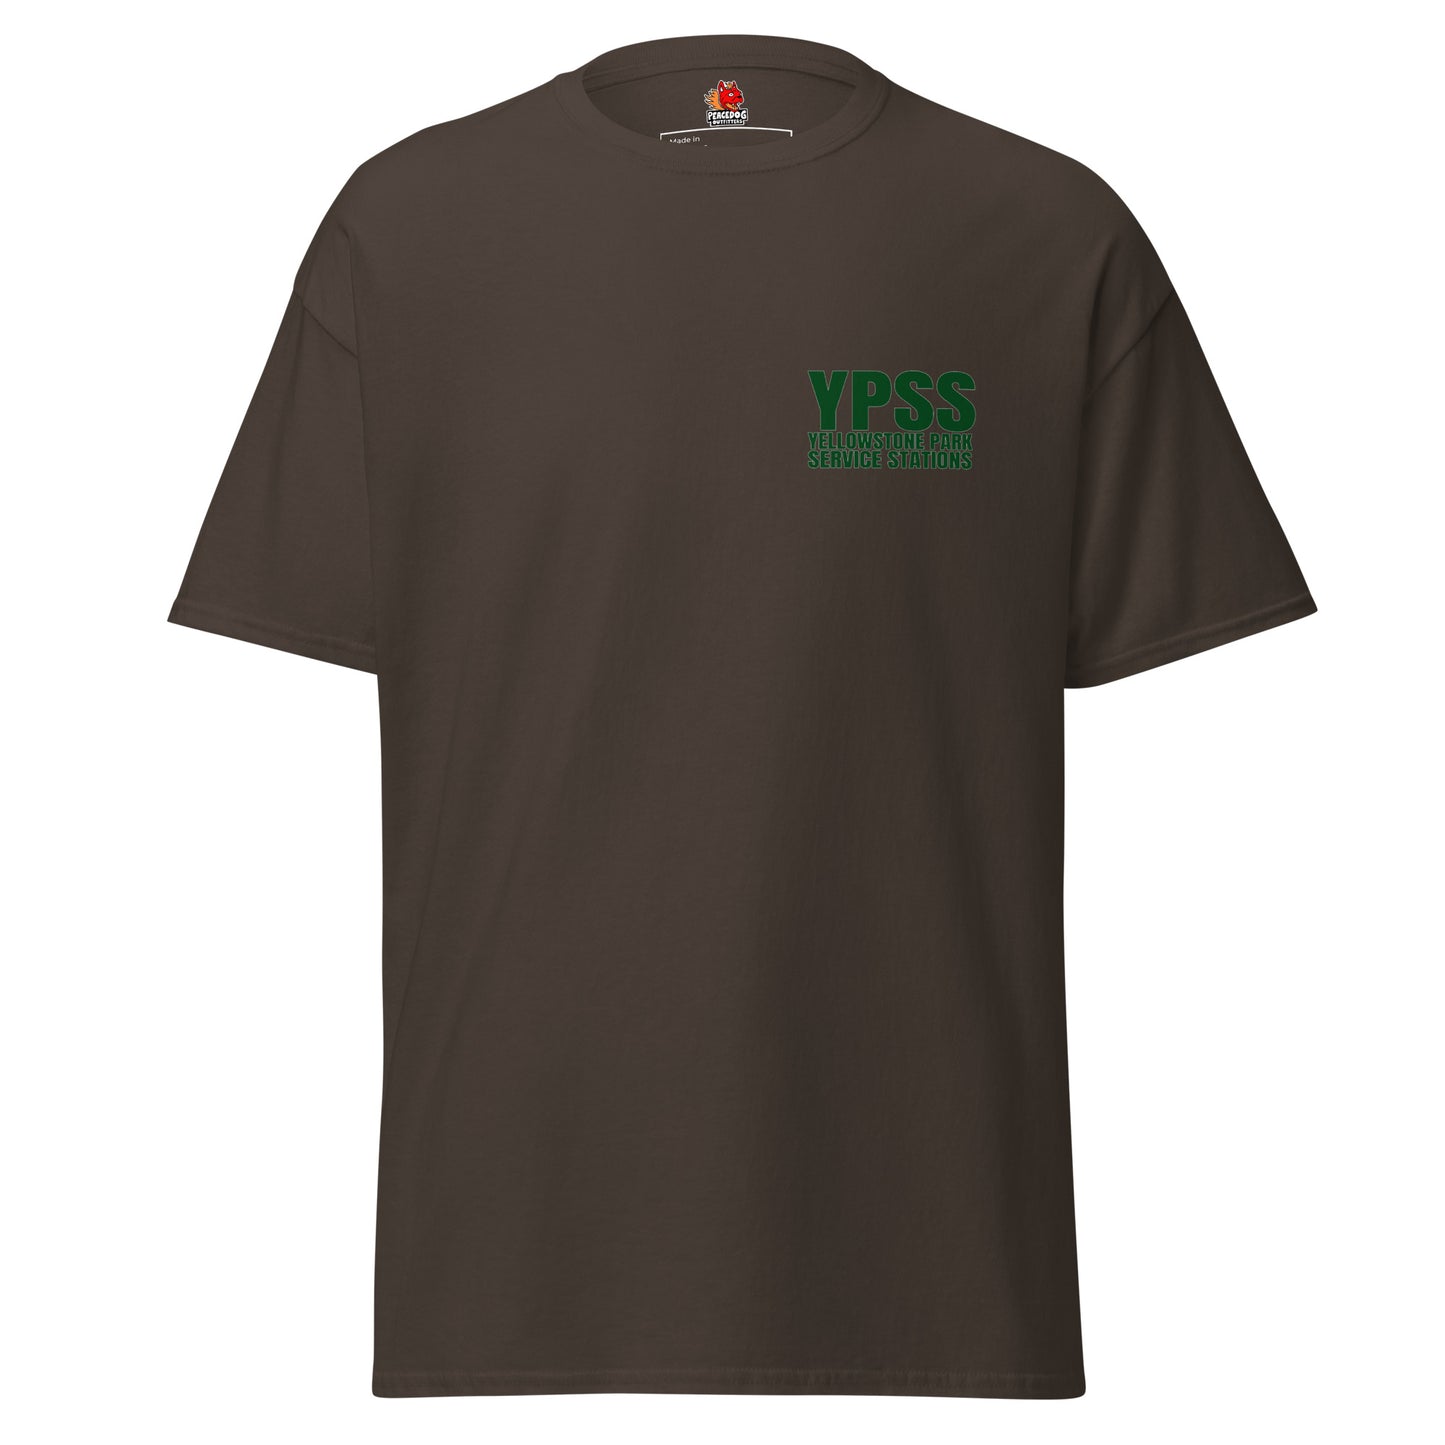 YPSS Yellowstone Park Service Stations - Tower/Roosevelt Station - Classic Tee